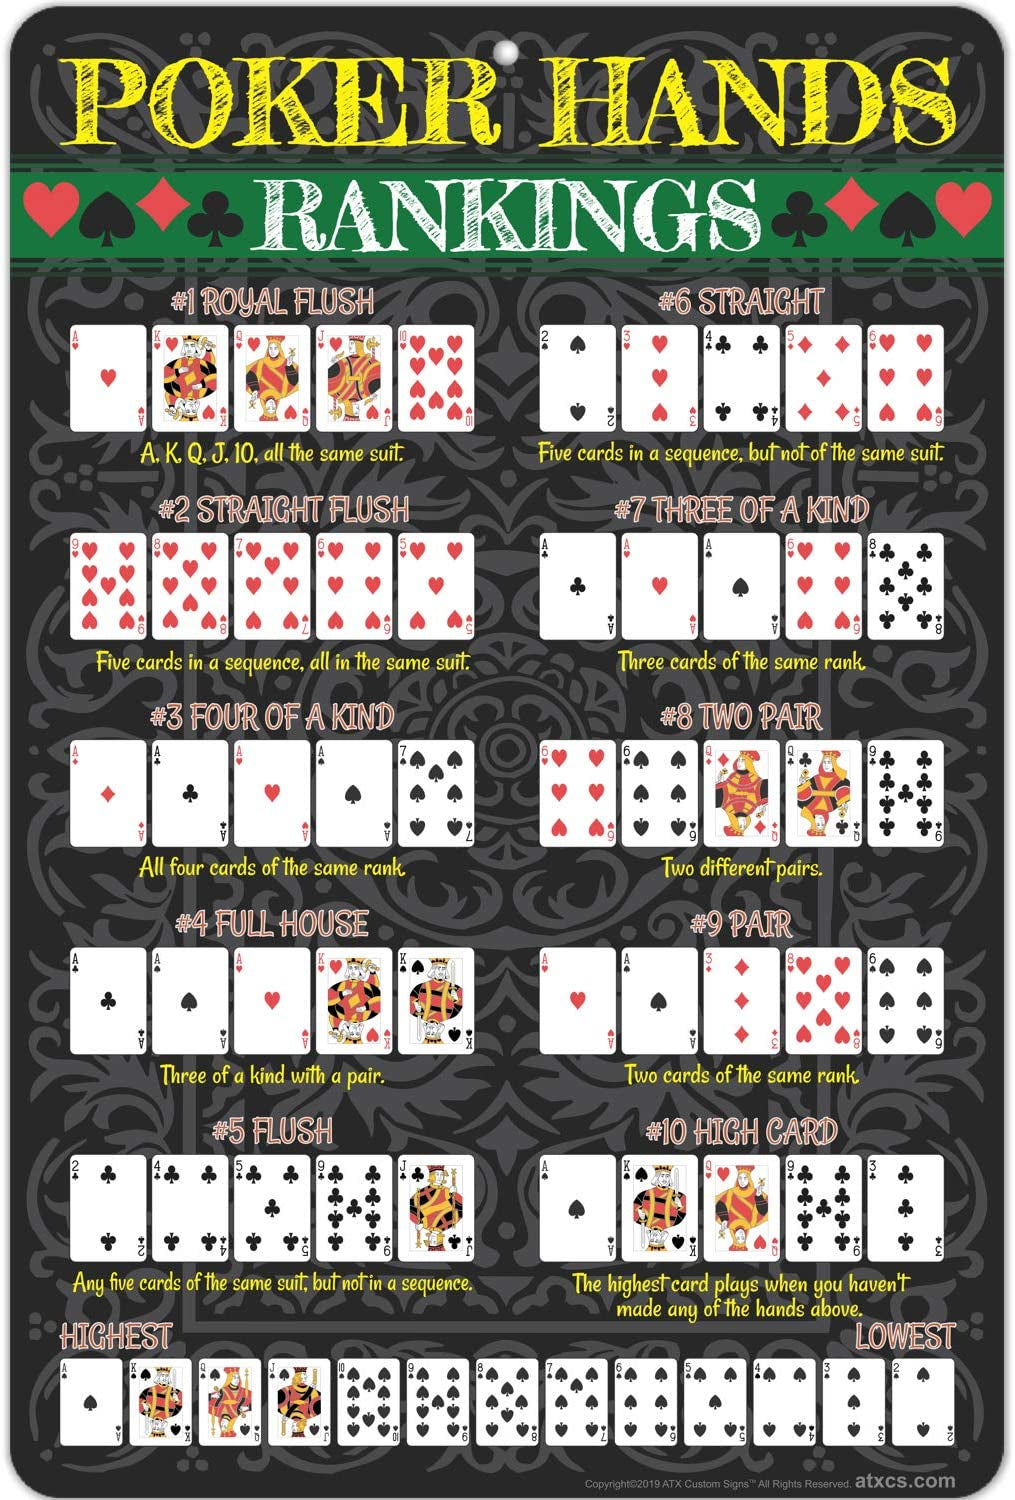 - Poker Hands Rankings Sign, Royal Flush, Straight Flush, Four of a Kind, Full House, Flush, Straight, Three of a Kind and More